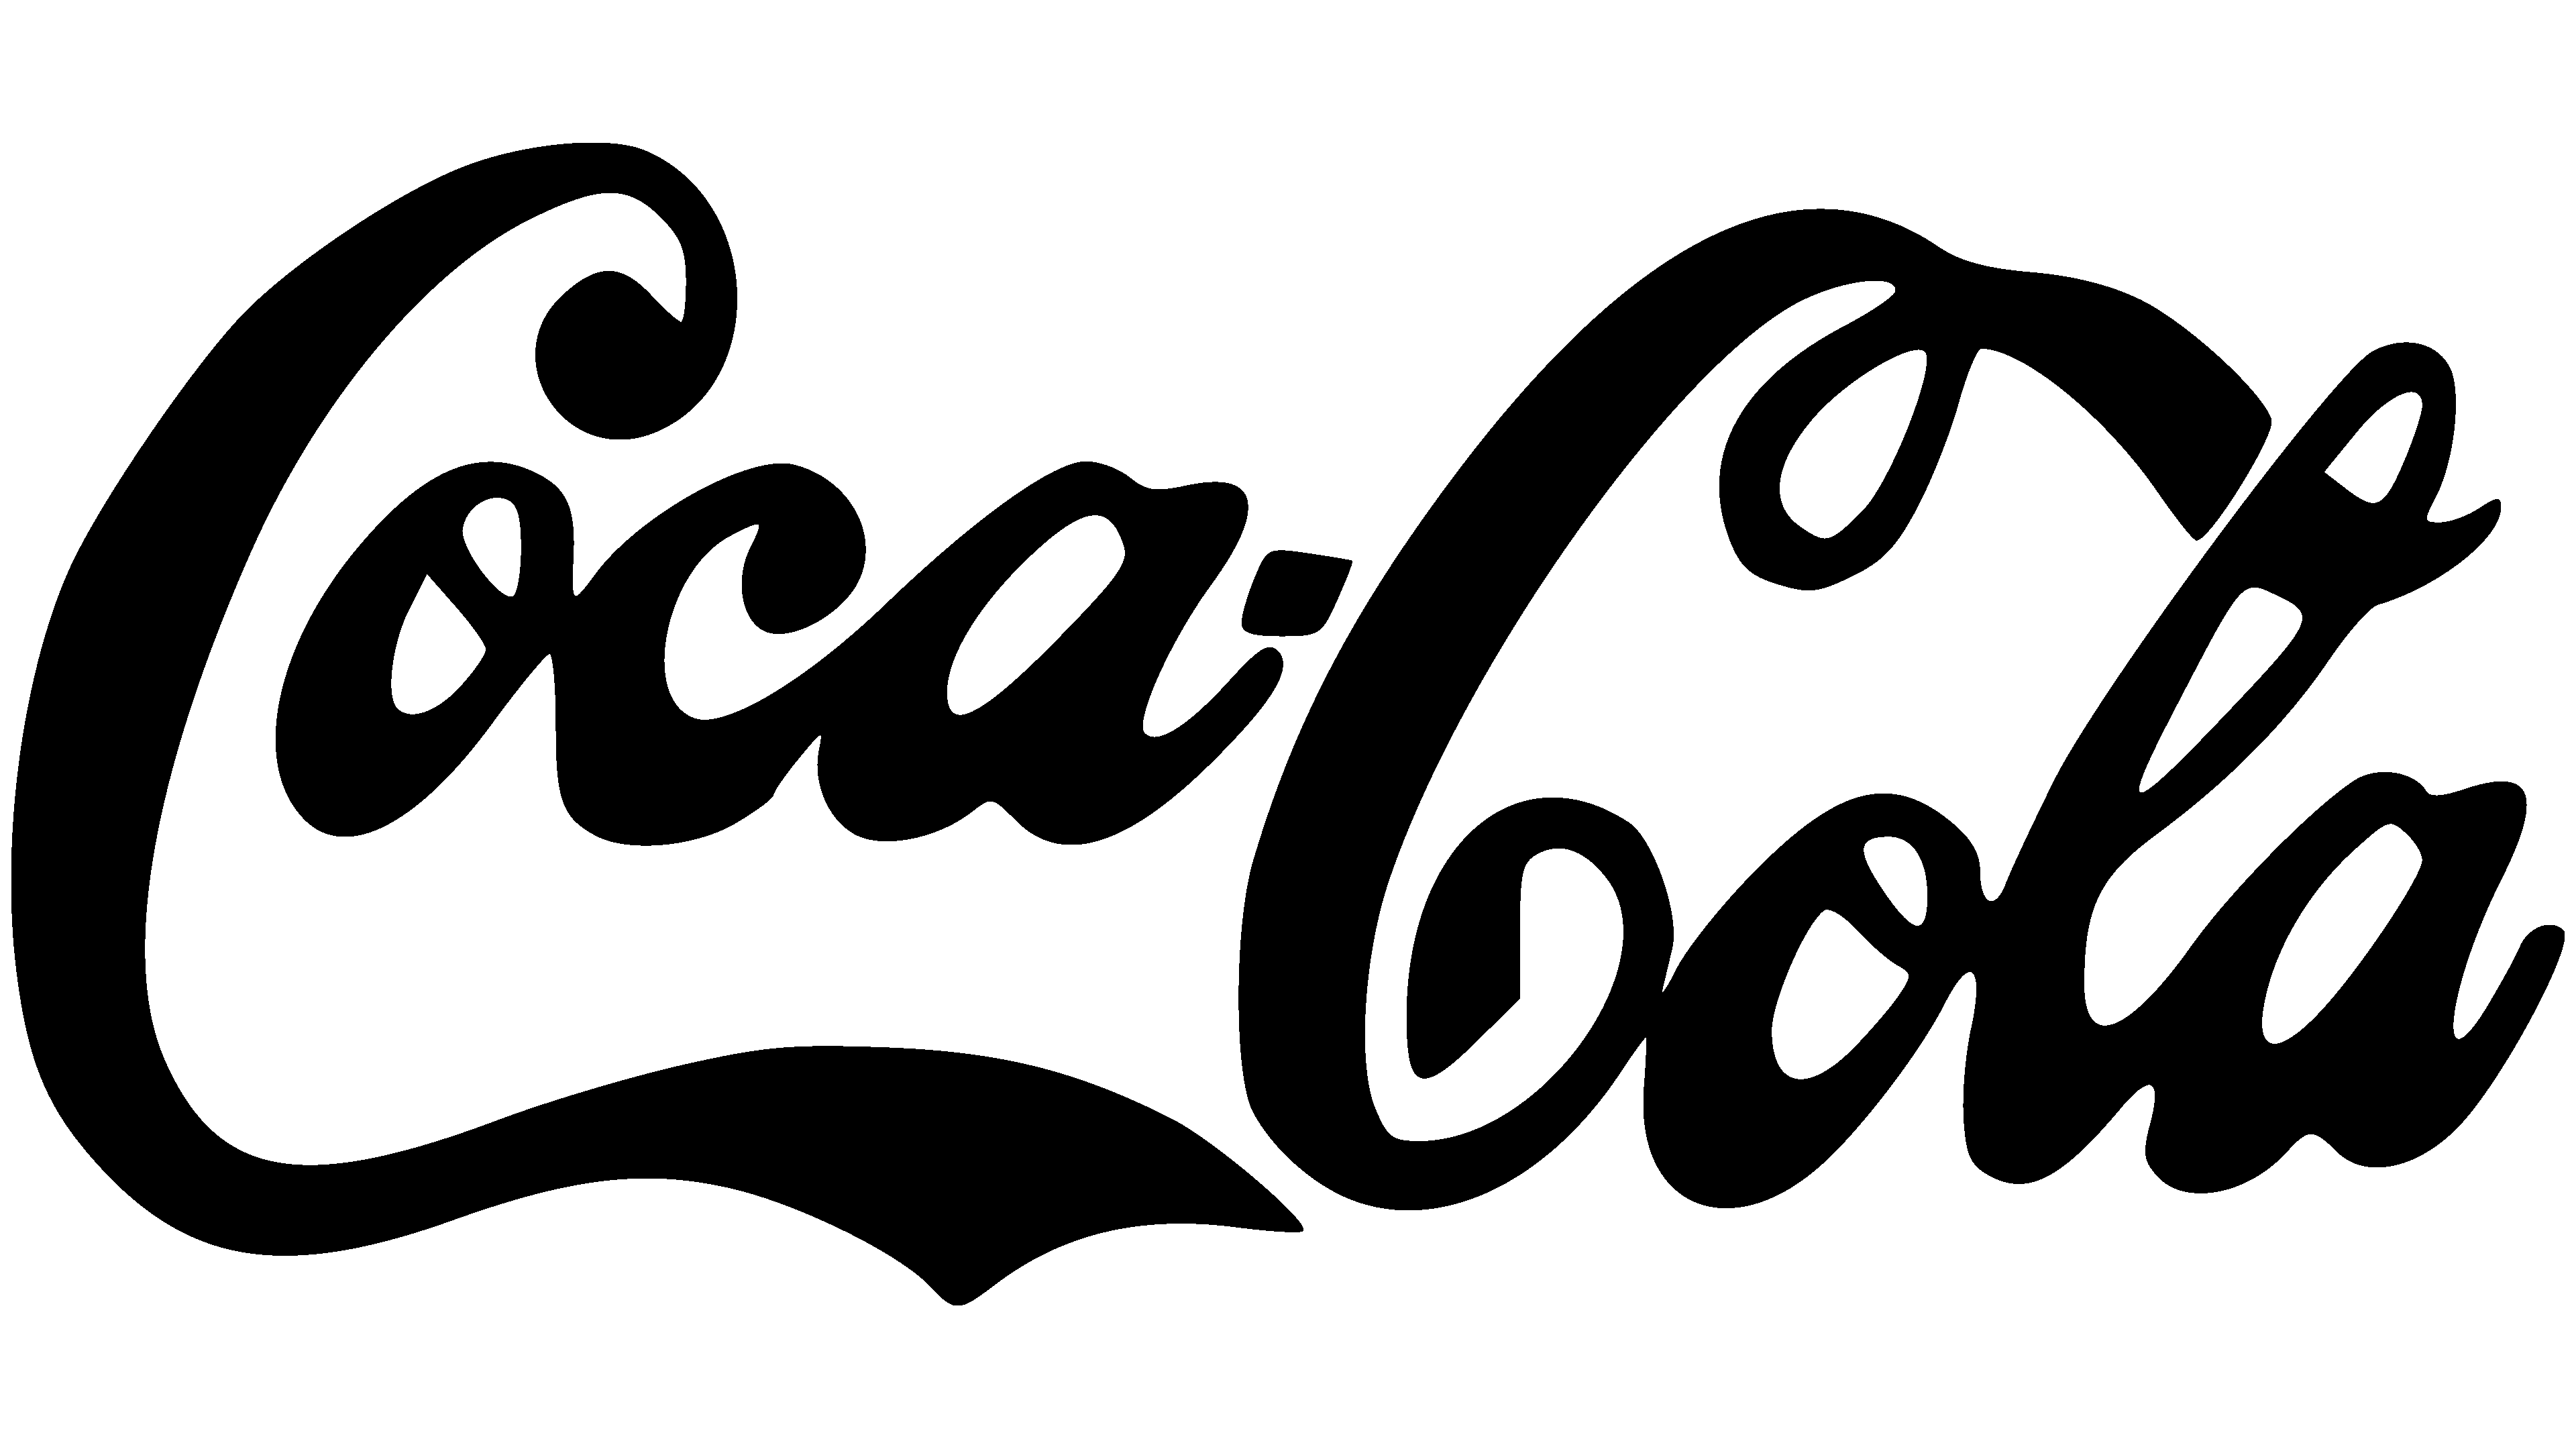 Coca Cola Logo Vector Svg Icon Png Repo Free Png Icons | Images and ...